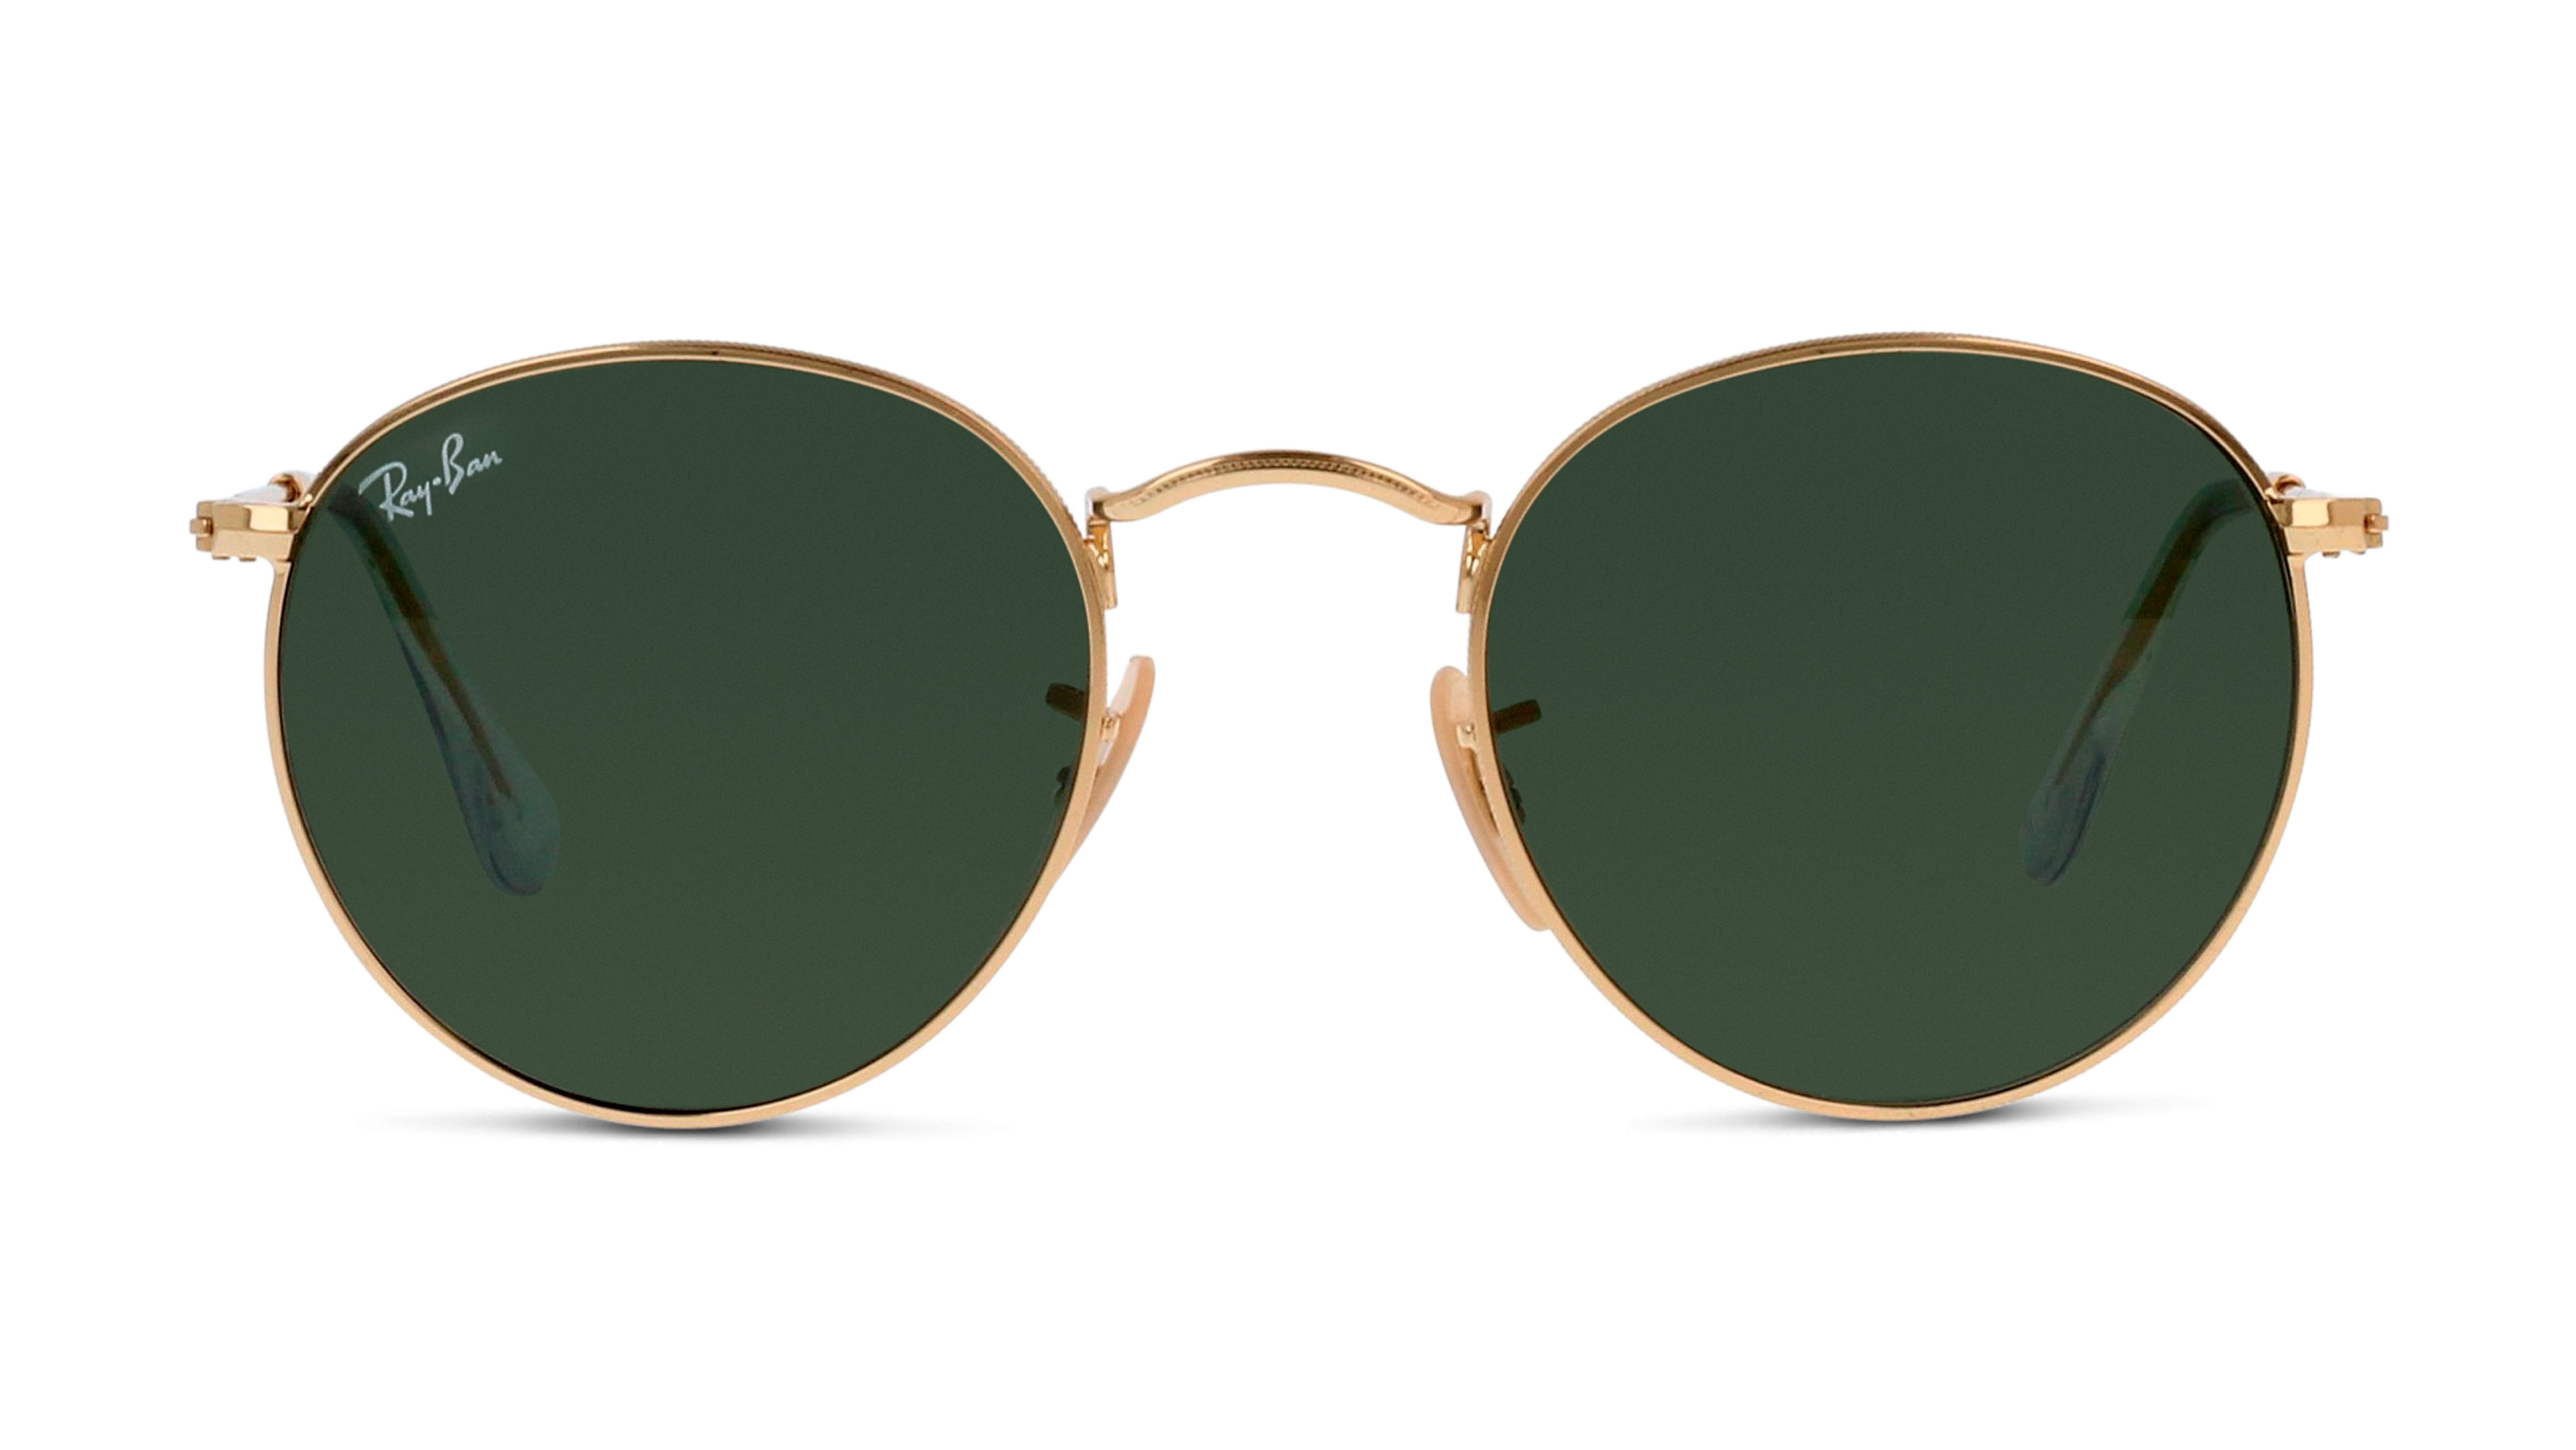 [products.image.front] Ray-Ban ROUND METAL 0RB3447 001 Sonnenbrille